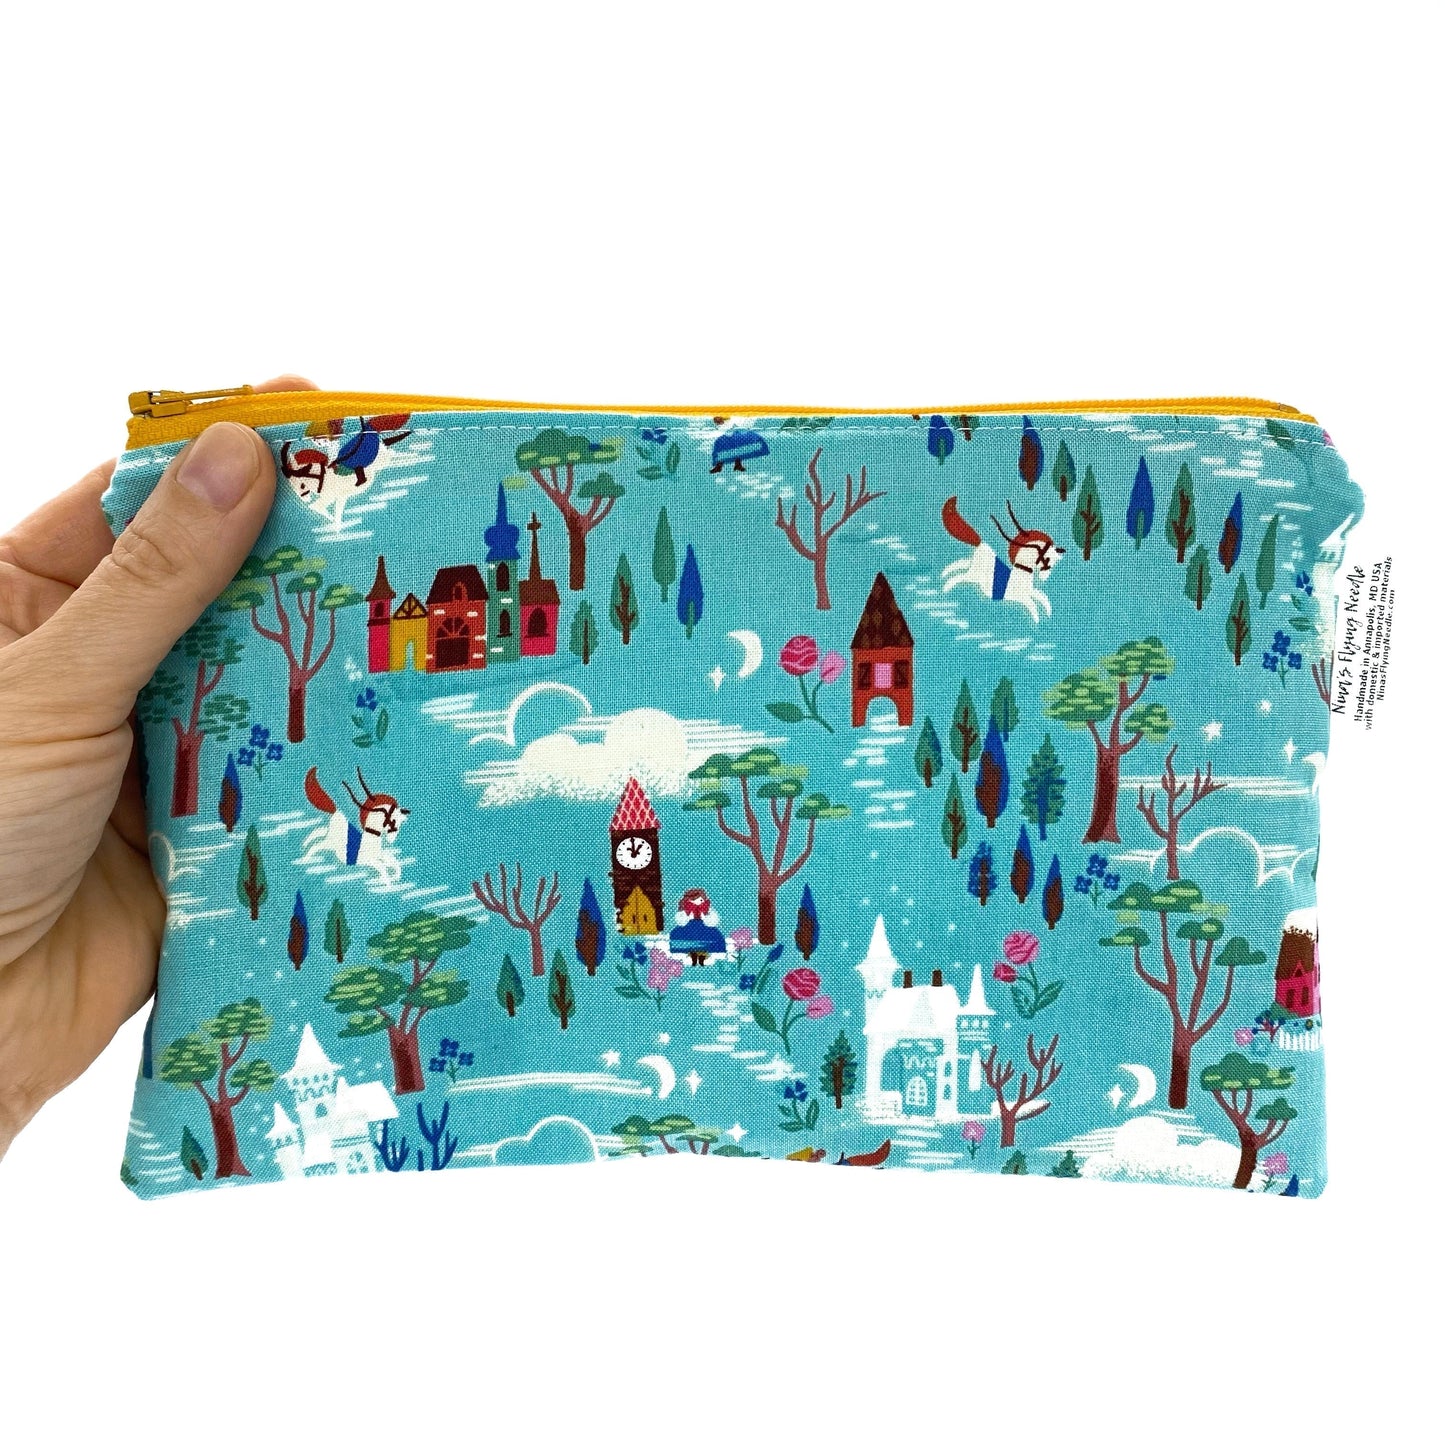 Snack Sized Reusable Zippered Bag Construction Dudes